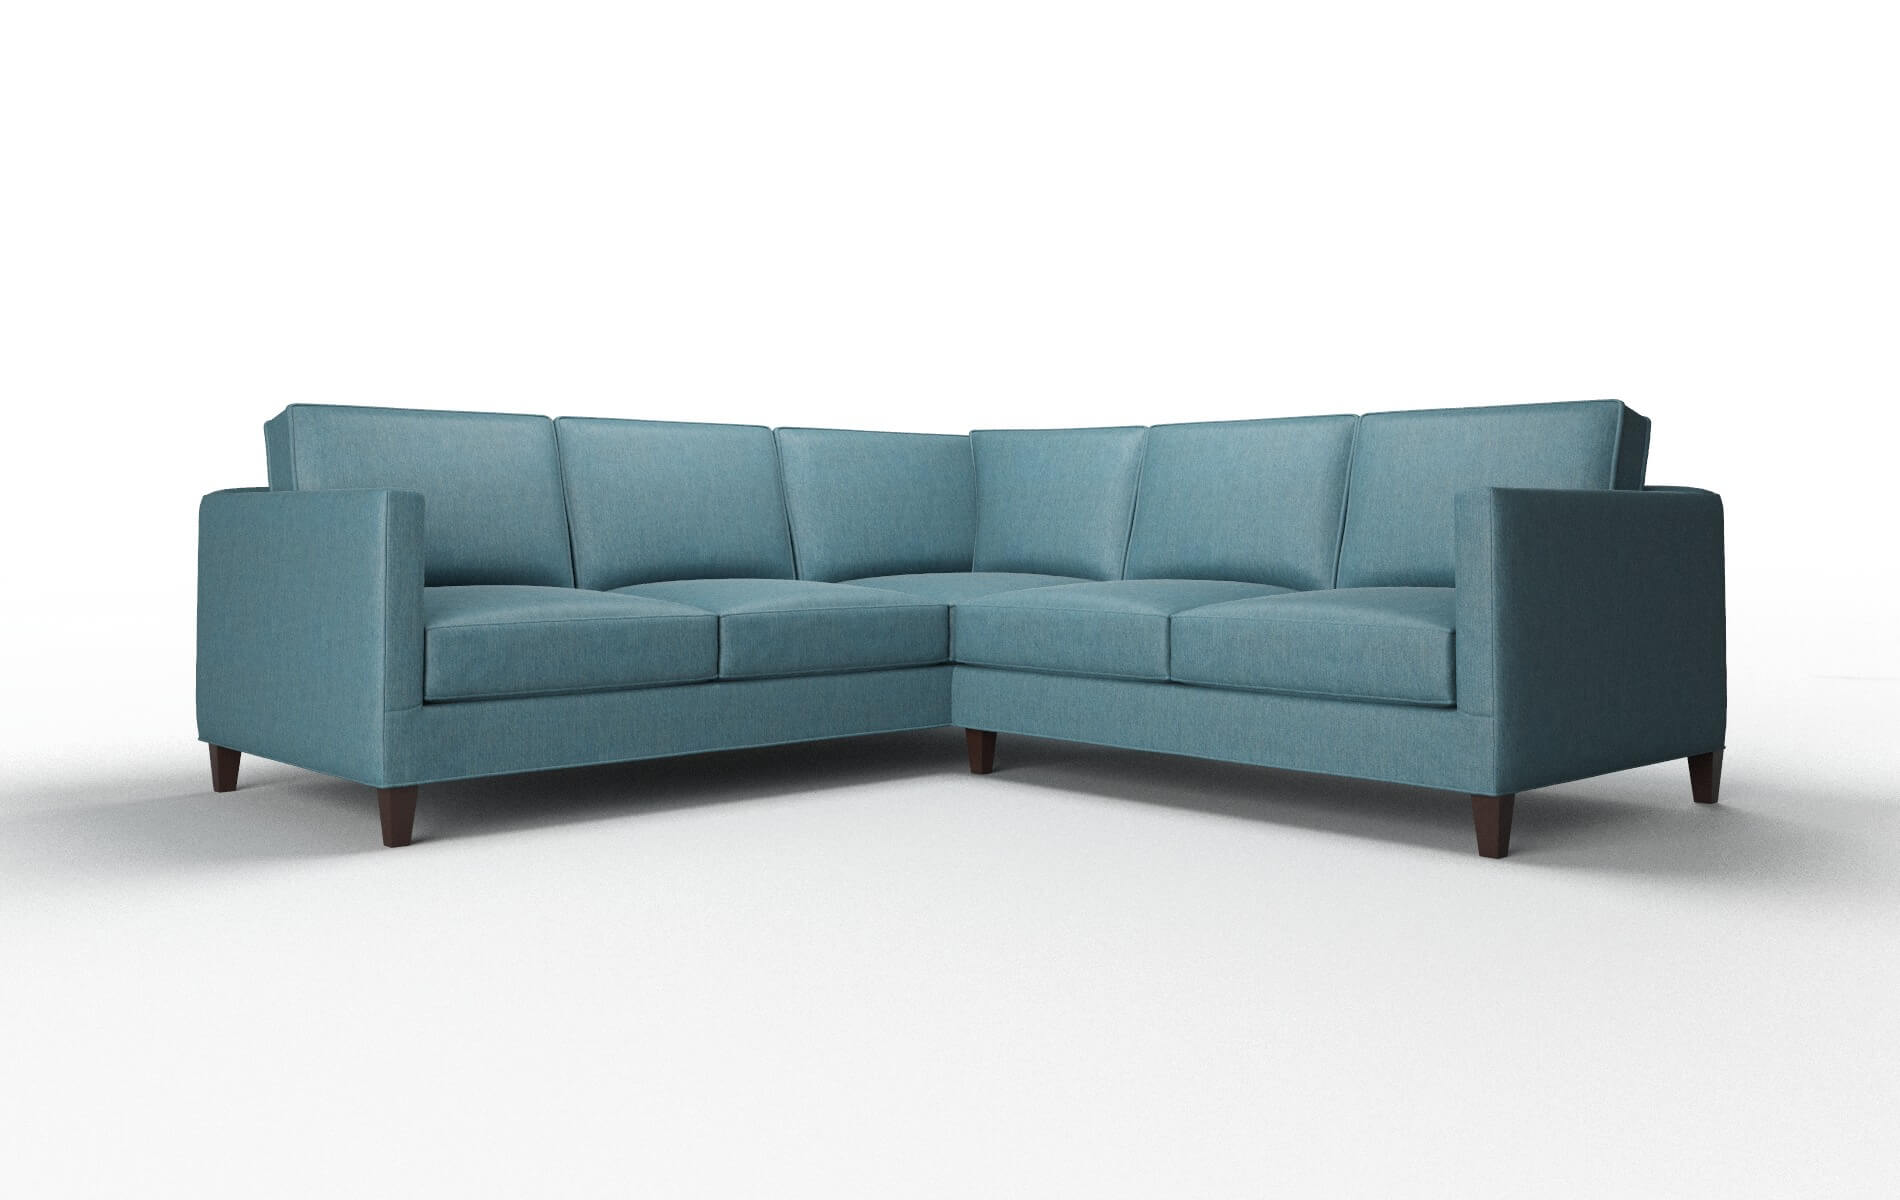 Alps Cosmo Teal chair espresso legs